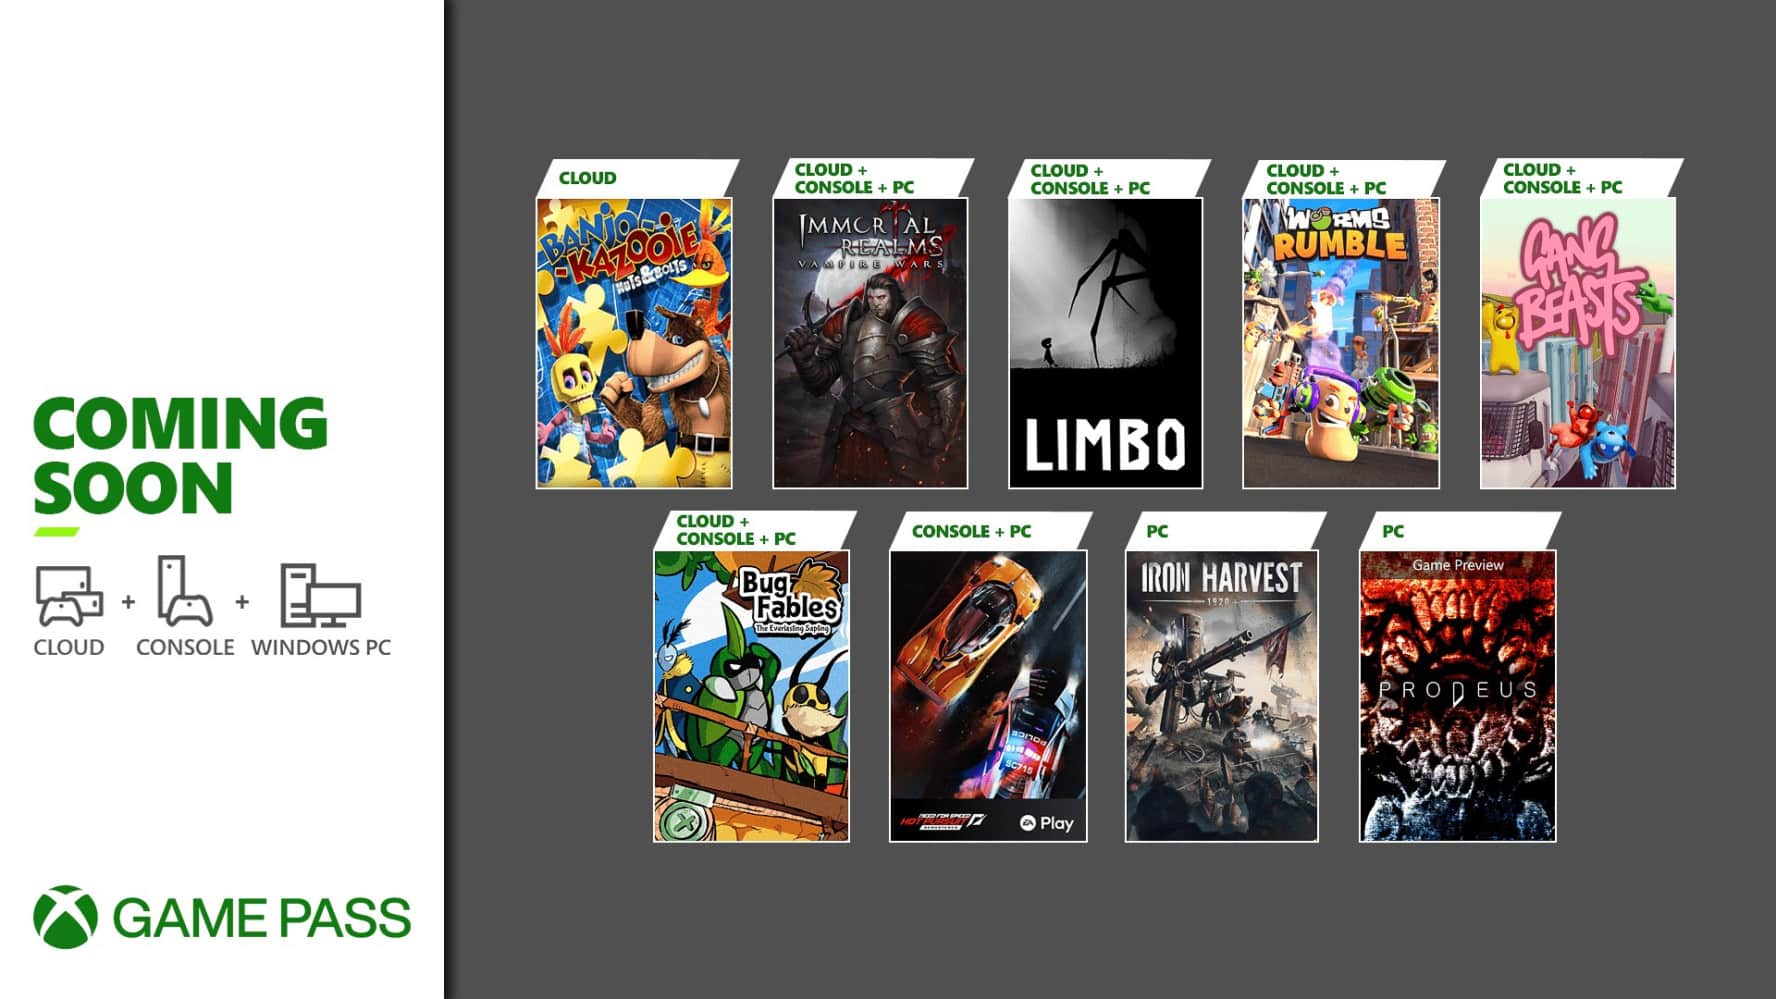 Xbox Game Pass gets Need for Speed Hot Pursuit, Limbo, and more